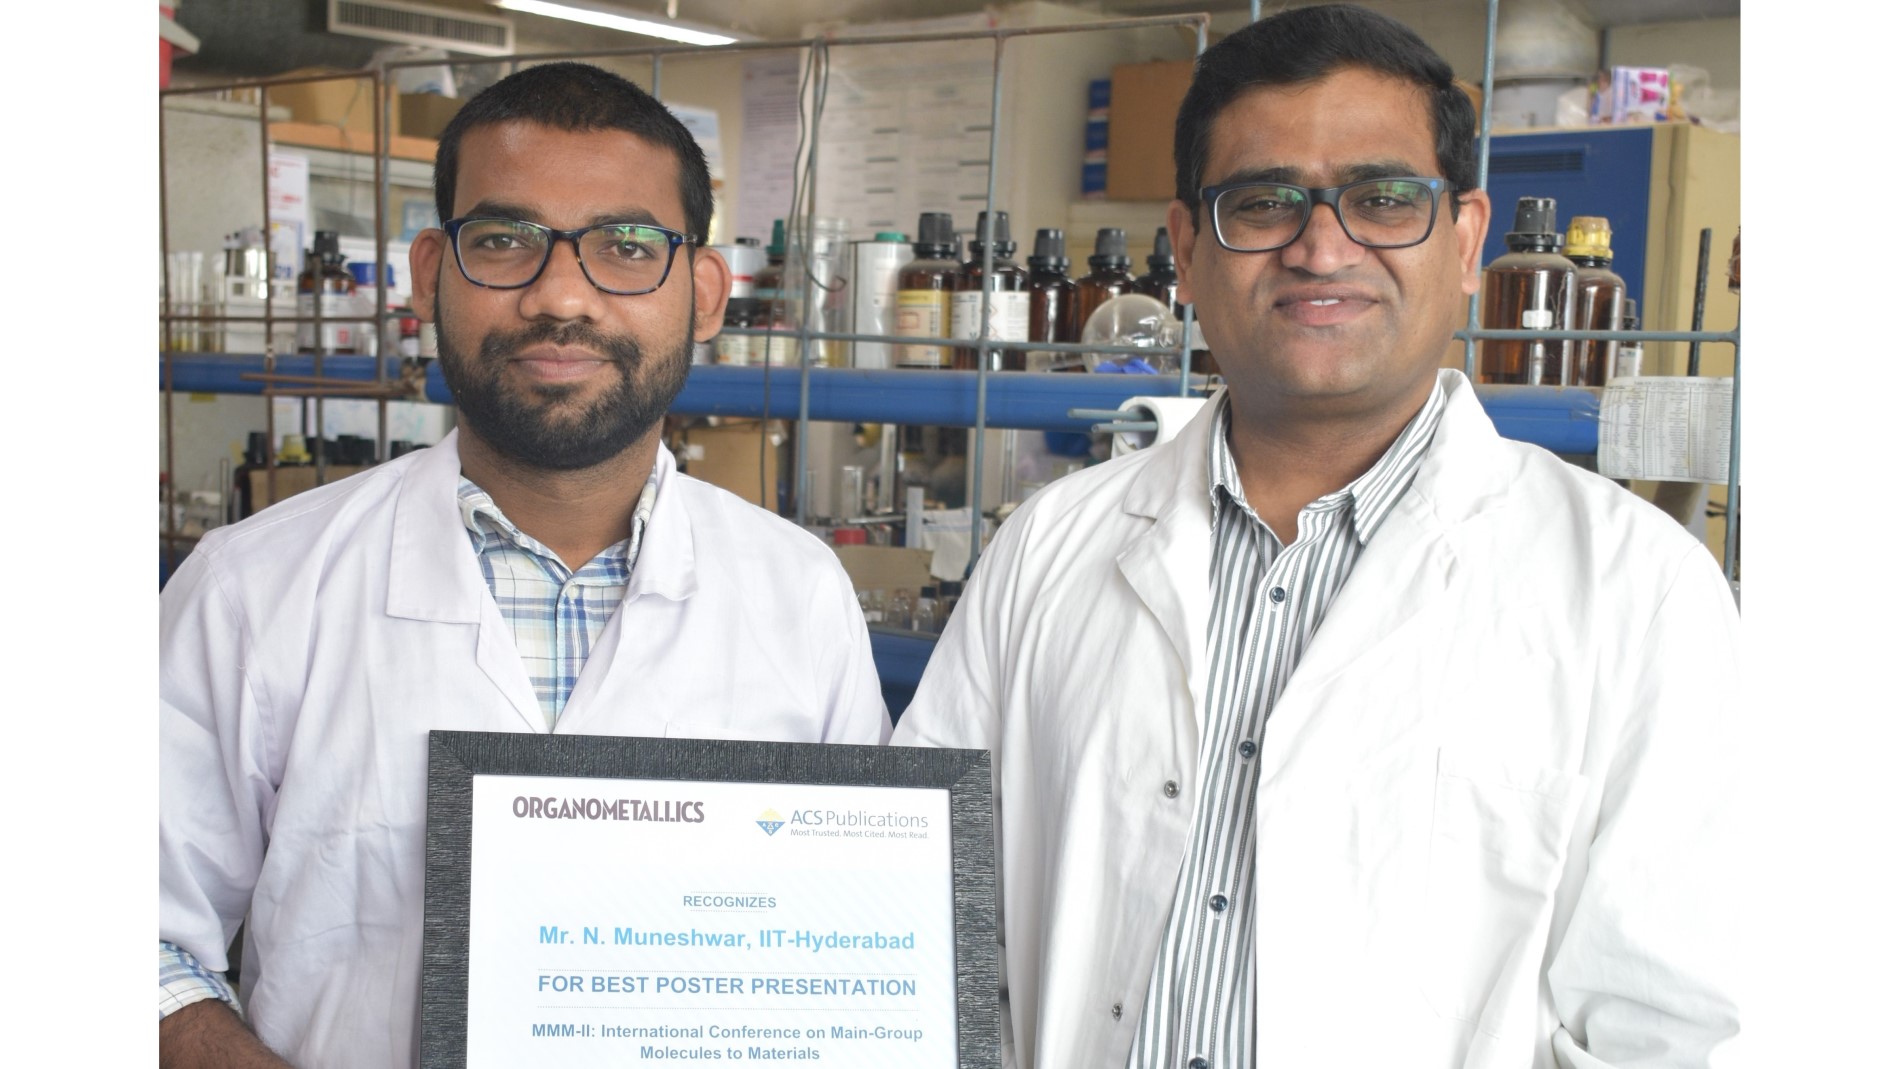 Nandeshwar Muneshwar Giridhar has received the best poster award from the American Chemical Society(ACS)-Organometallics in (MMM-II) International Conference.